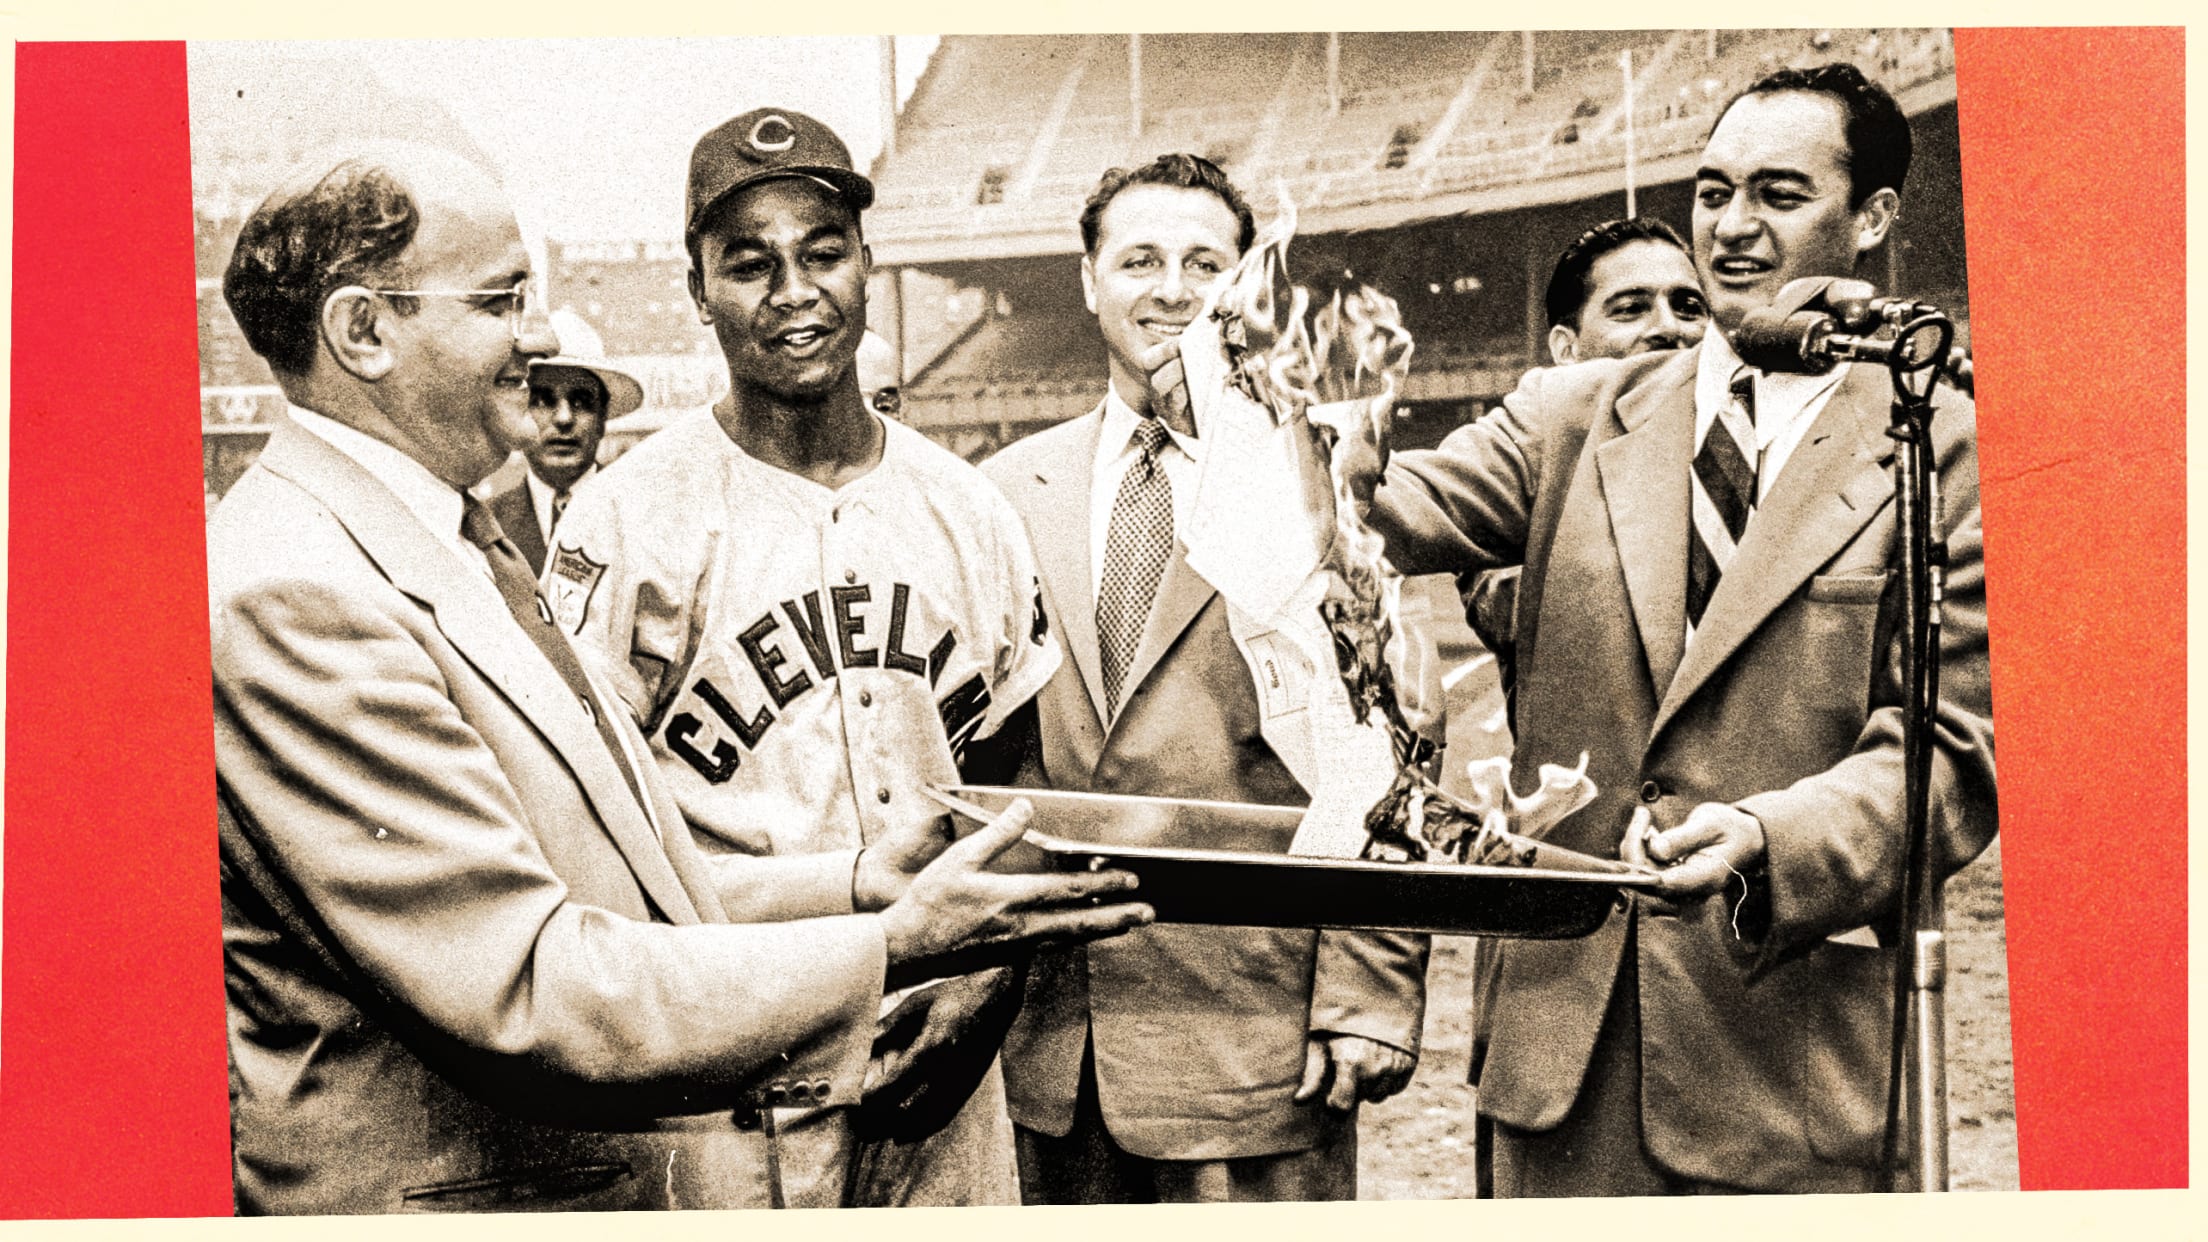 All Star: How Larry Doby Smashed the Color Barrier in Baseball